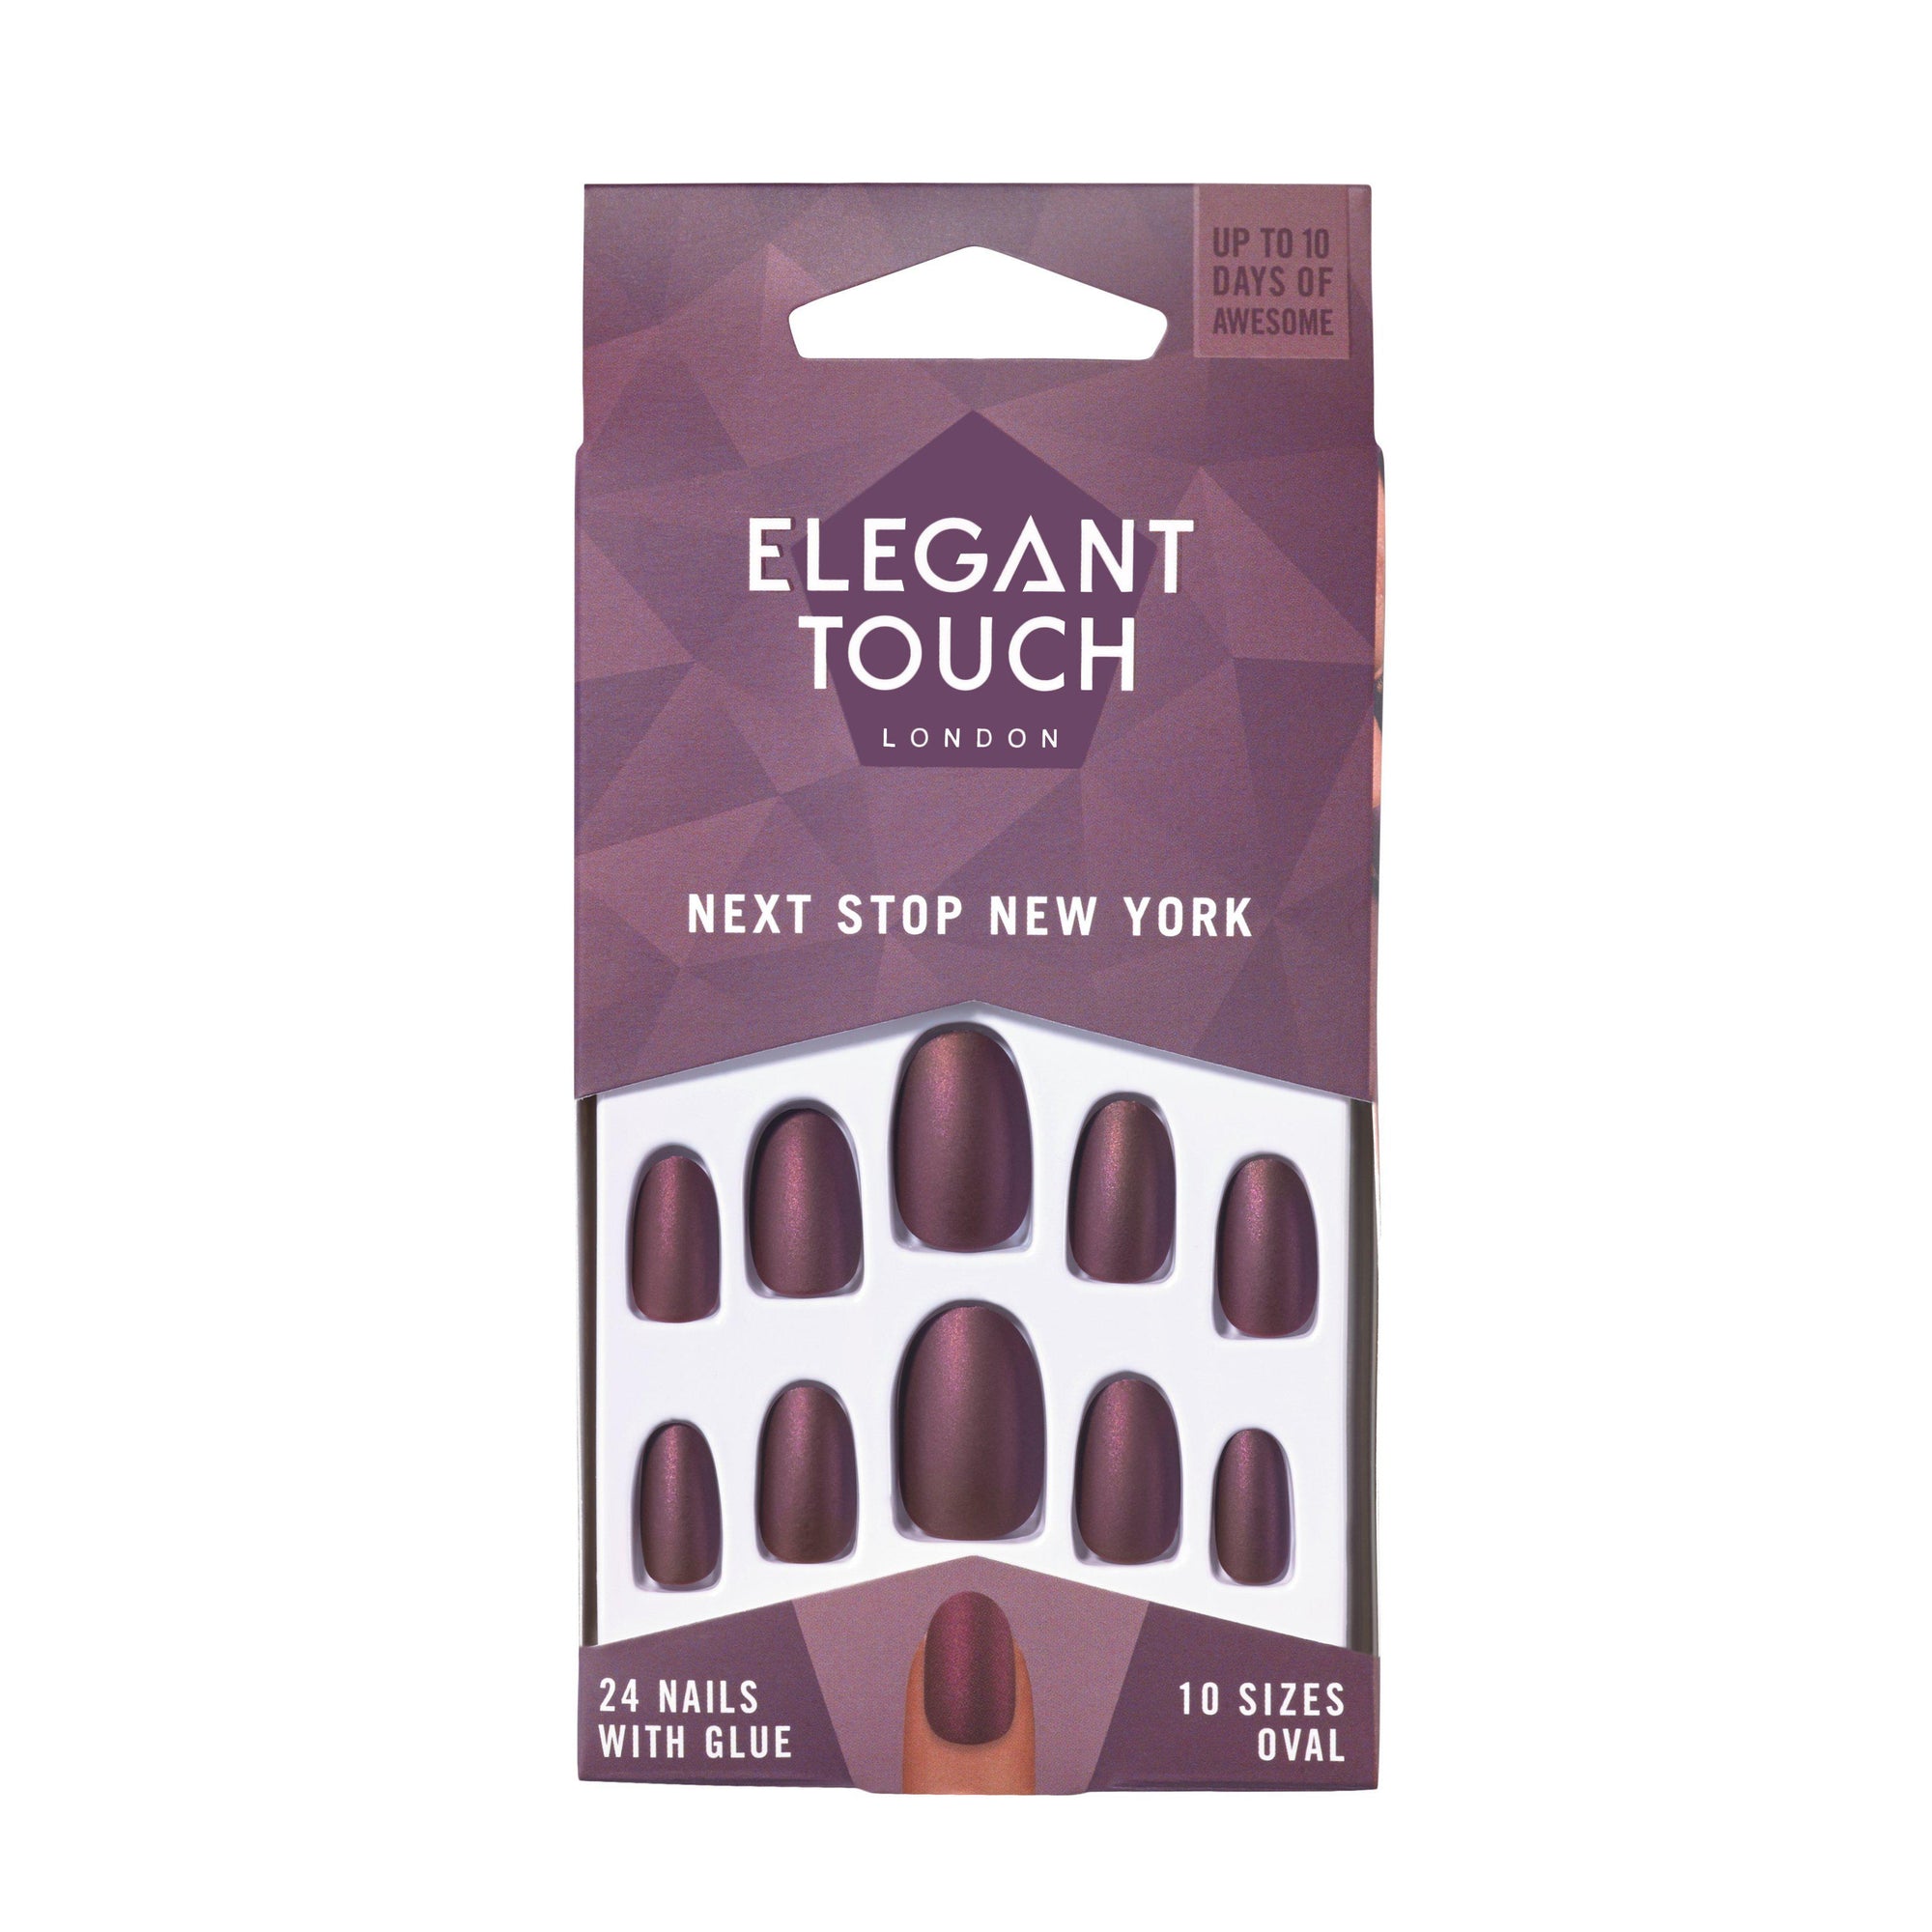 Elegant Touch Polished Nails Next Stop New York